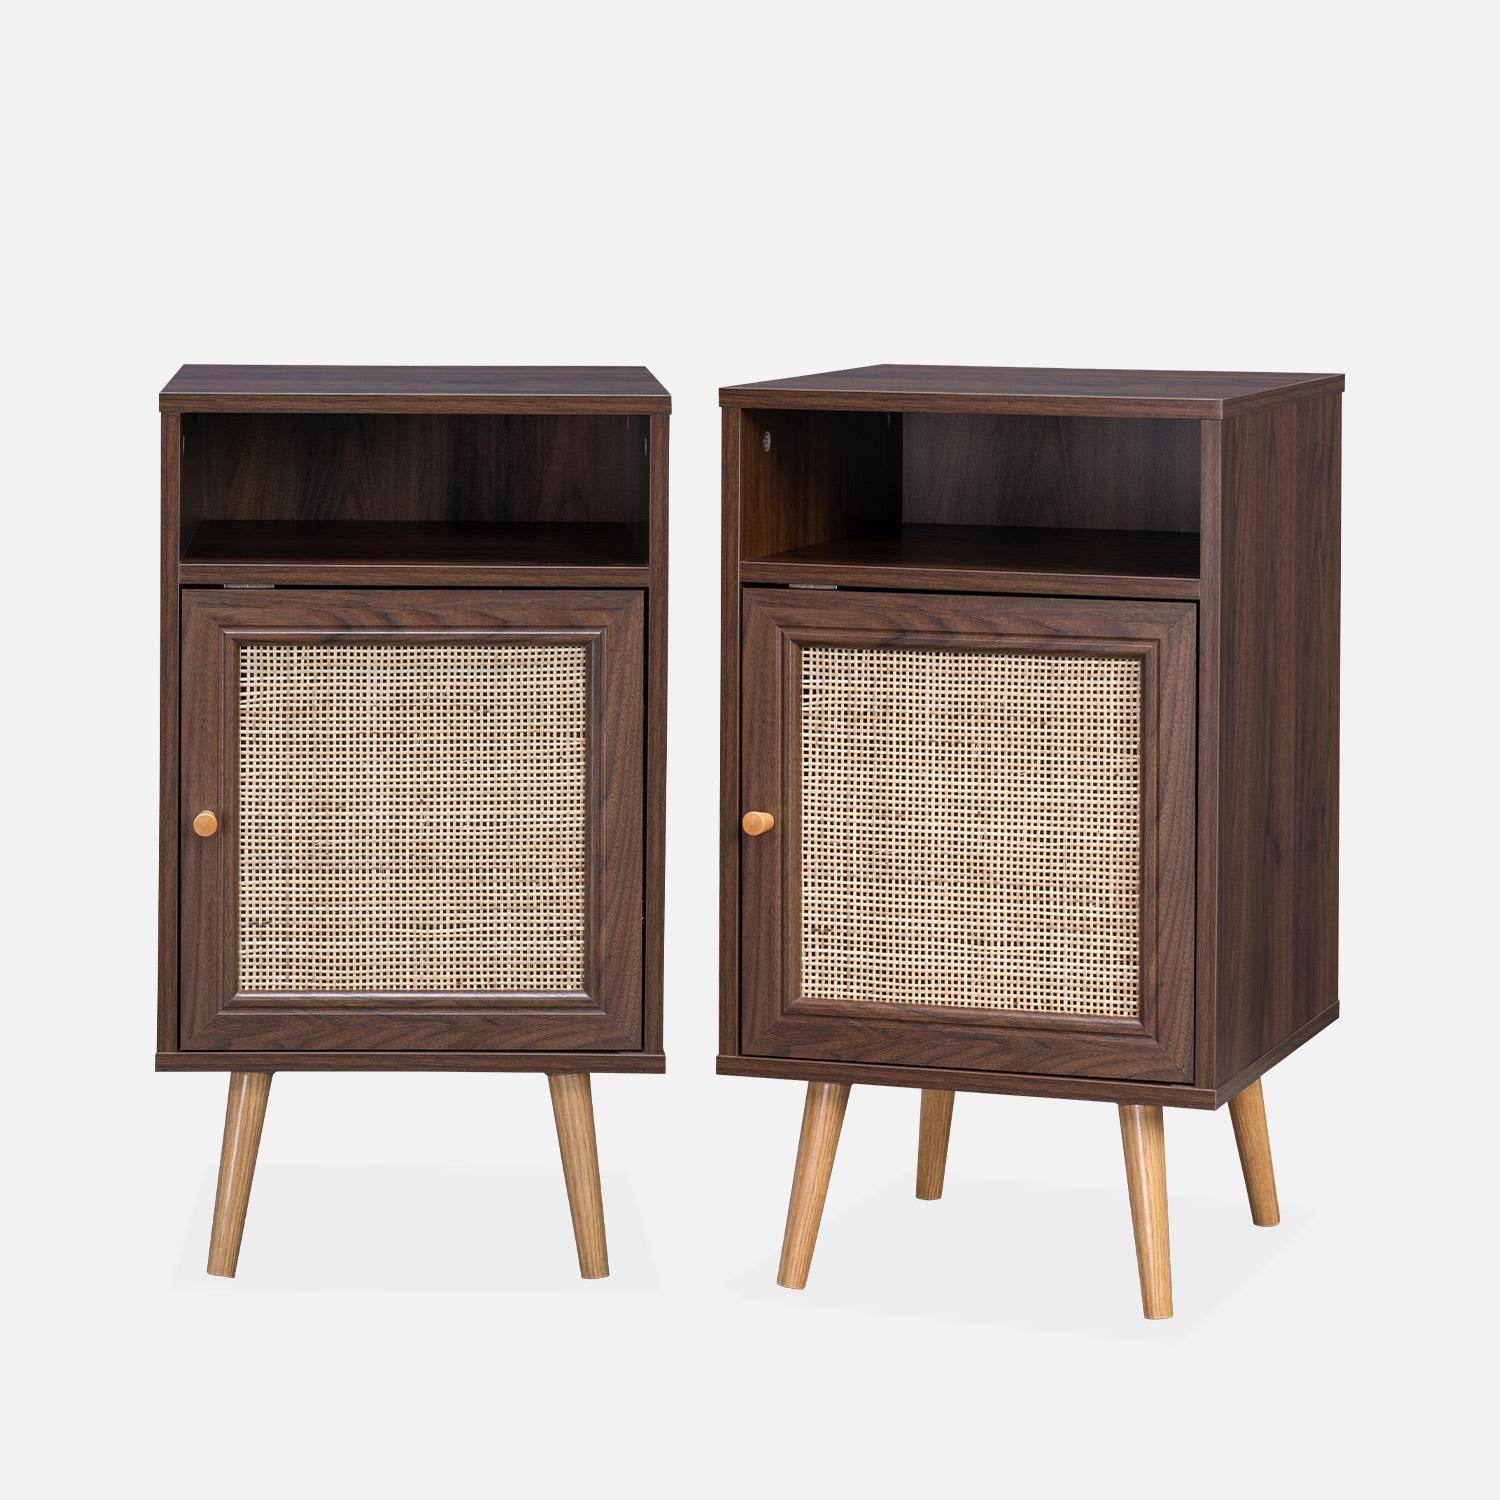 Pair of Scandi-style wood and cane rattan bedside tables with cupboard, 40x39x70cm - Boheme - Dark Wood colour Photo3